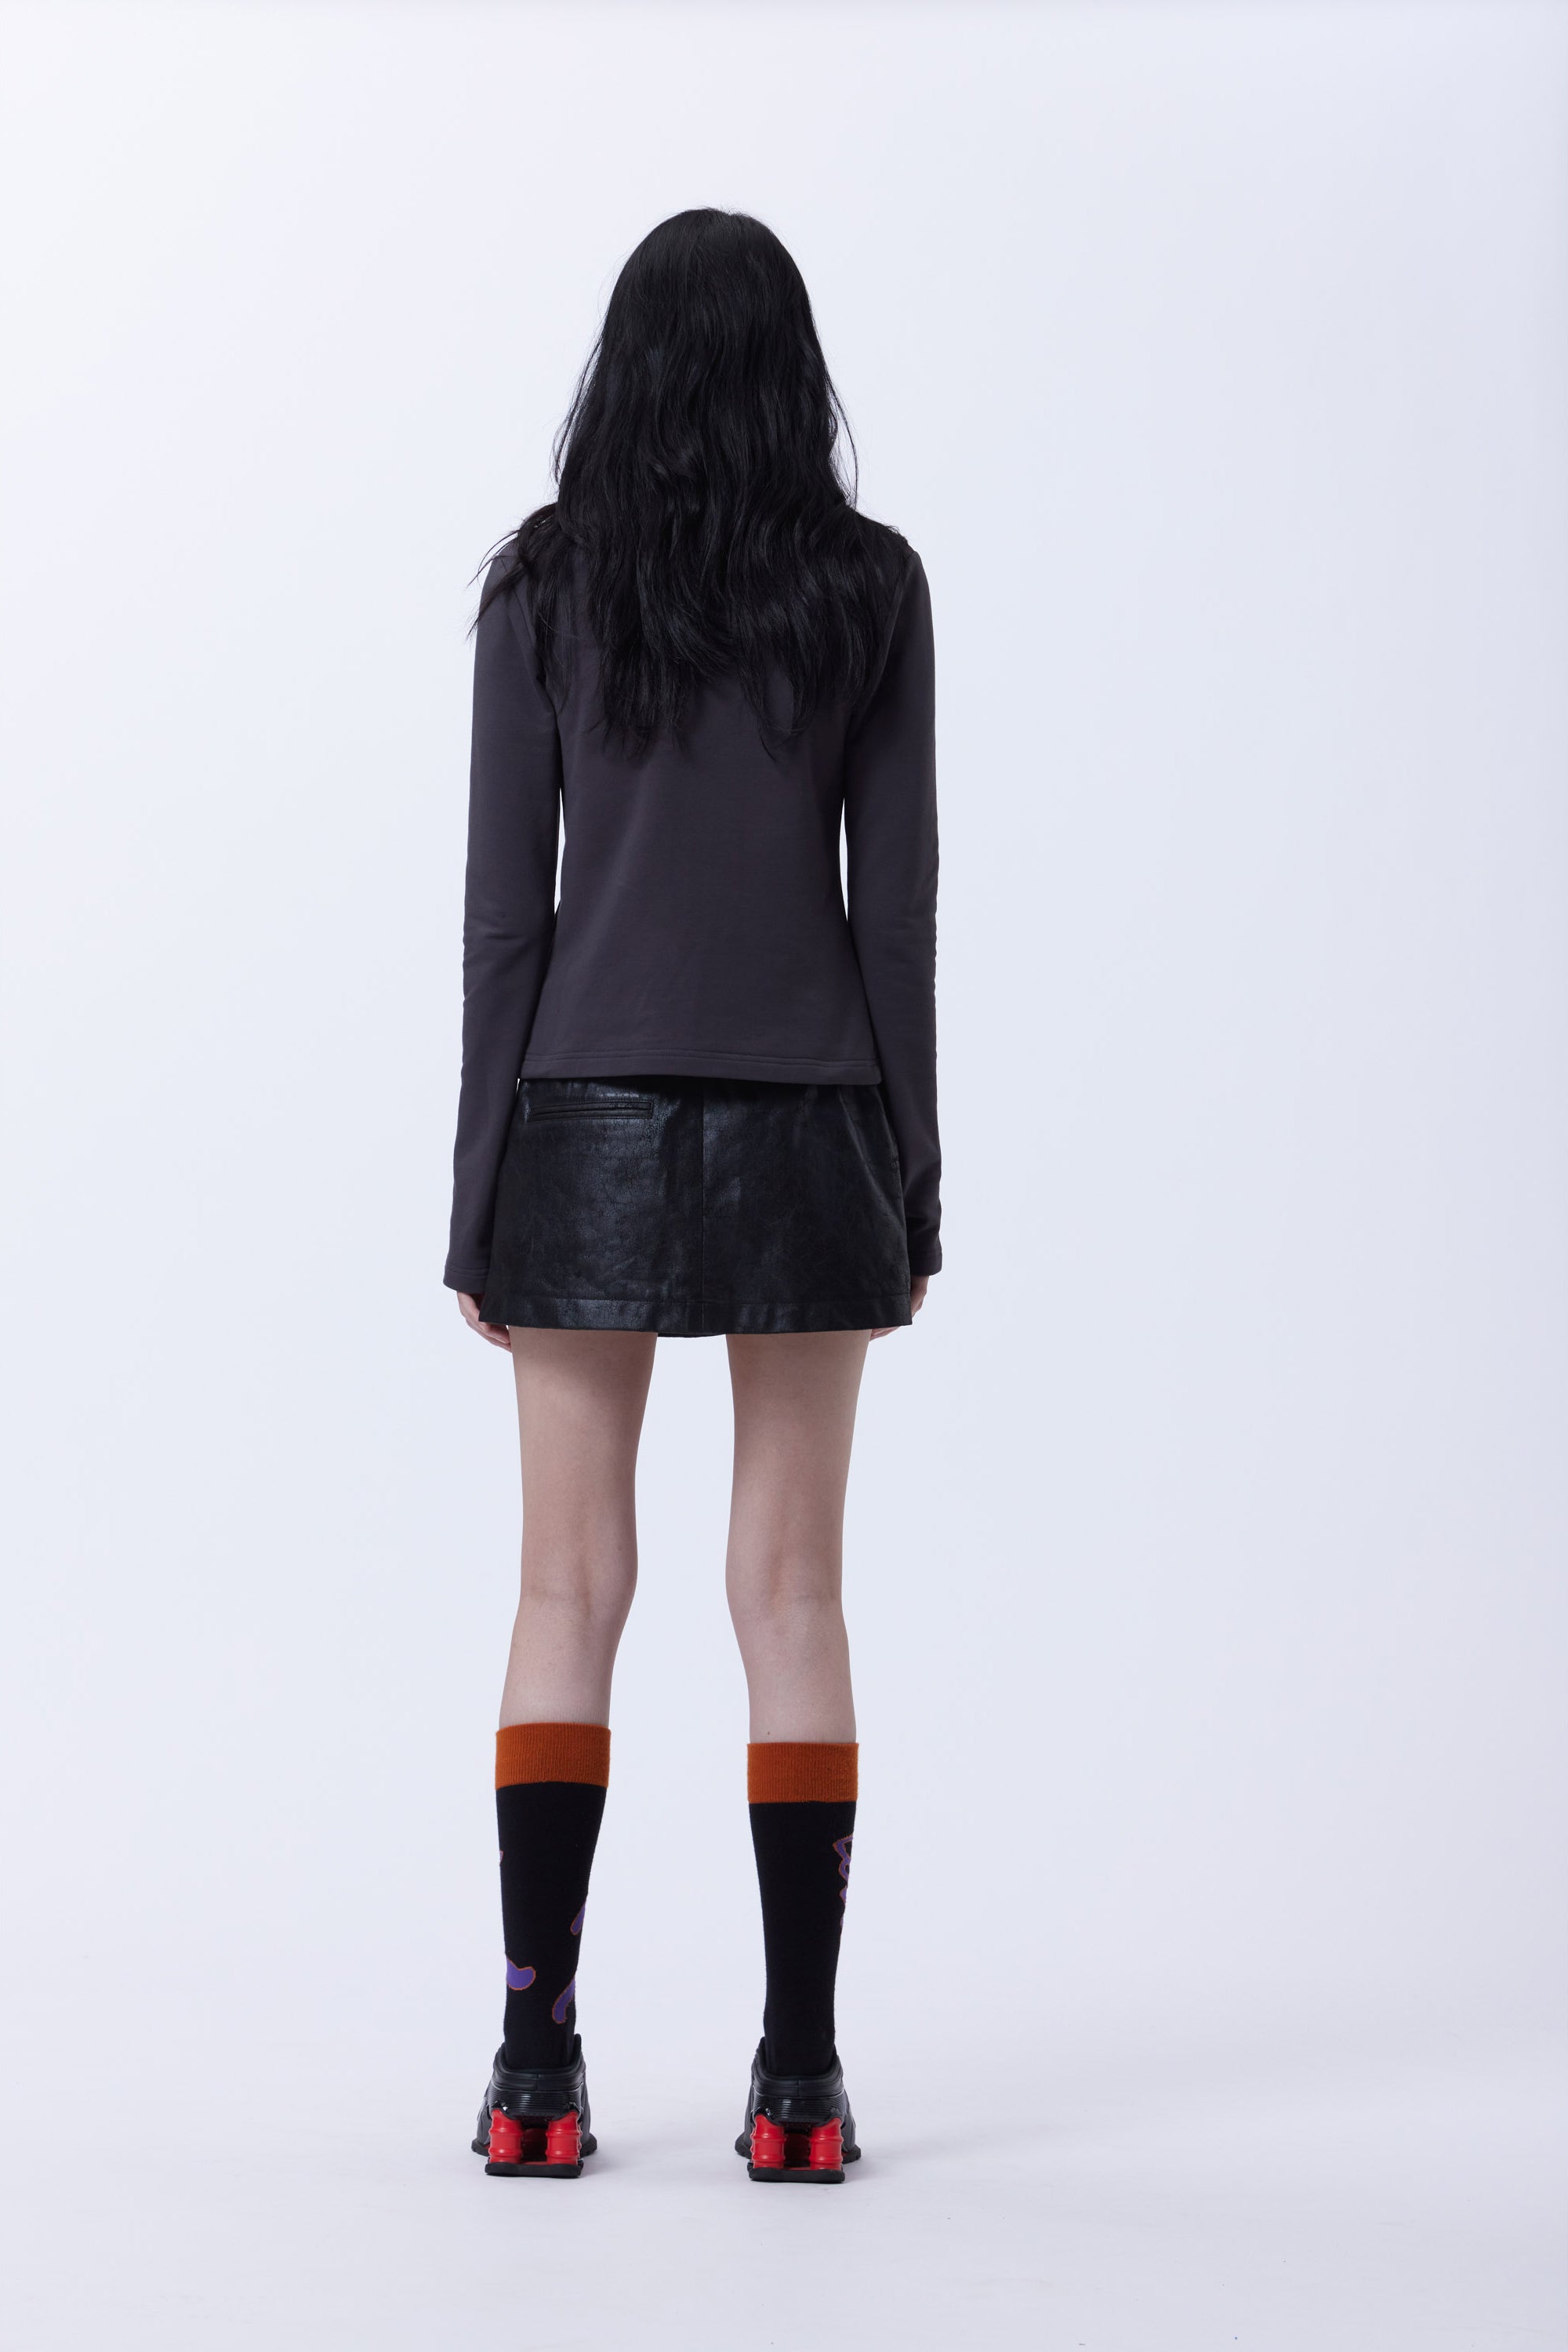 The CRACKED VINYL MINI SKIRT  available online with global shipping, and in PAM Stores Melbourne and Sydney.